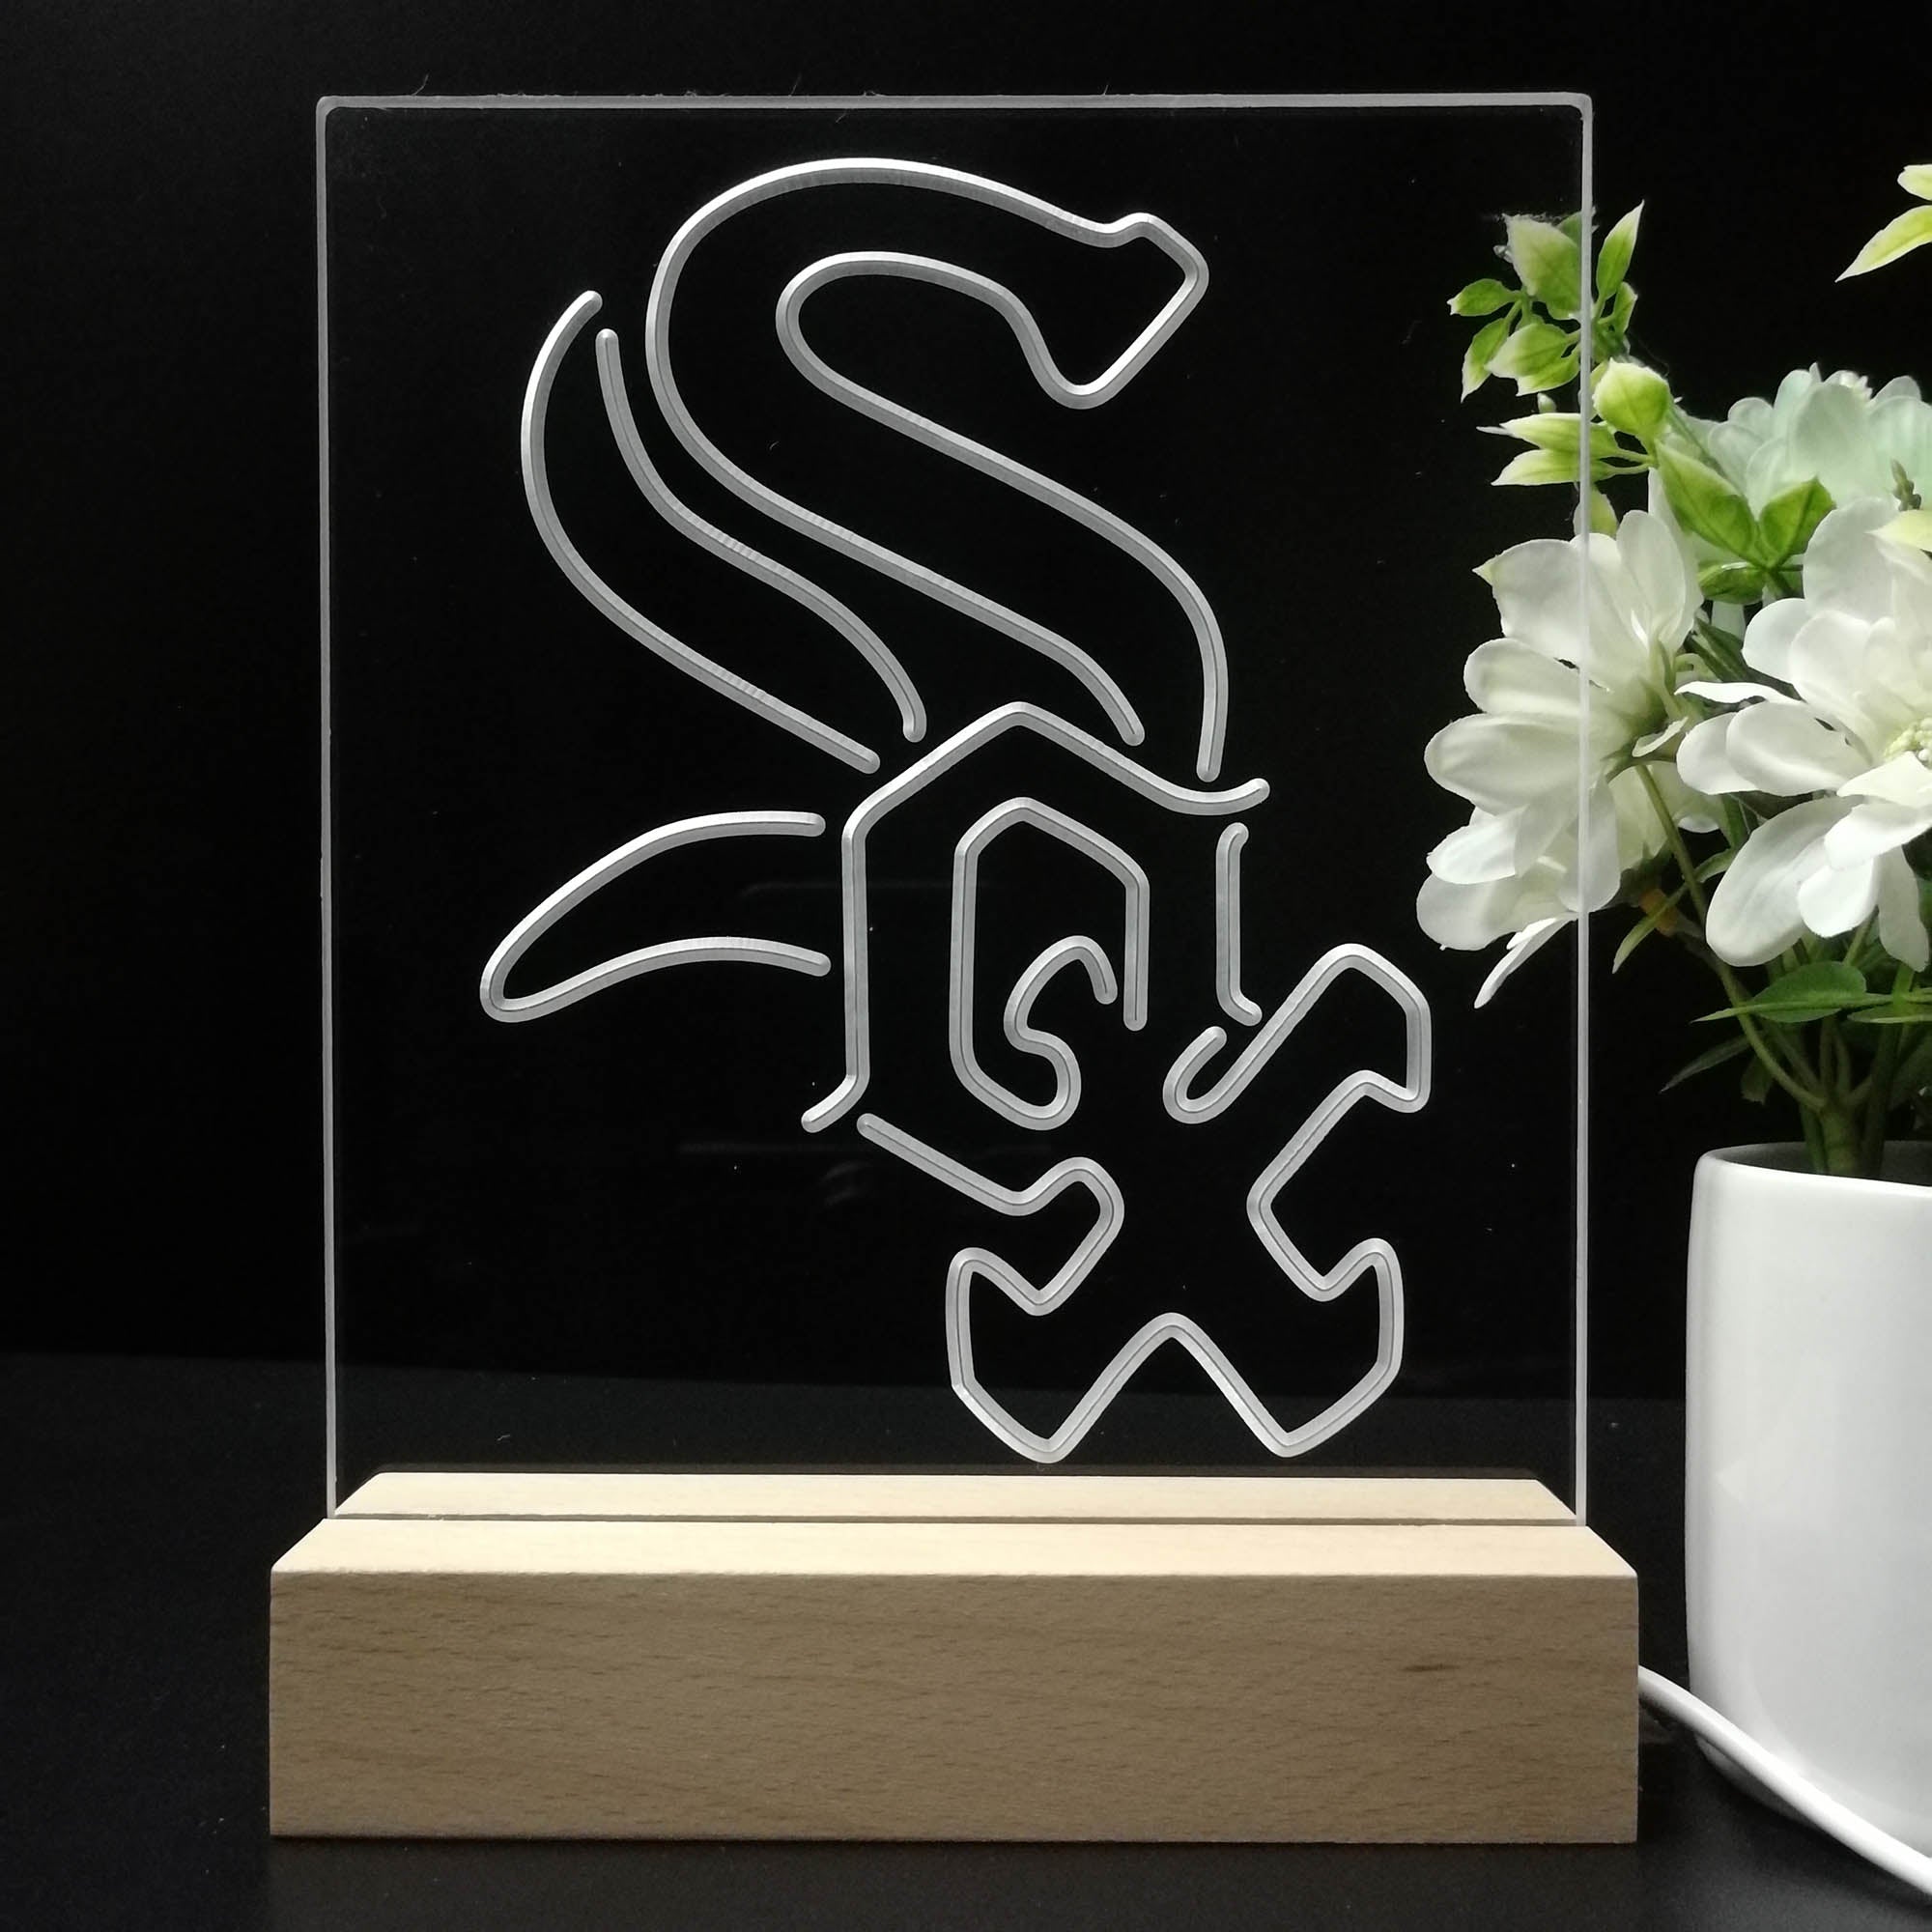 Chicago White Sox Neon Sign Table Top Lamp